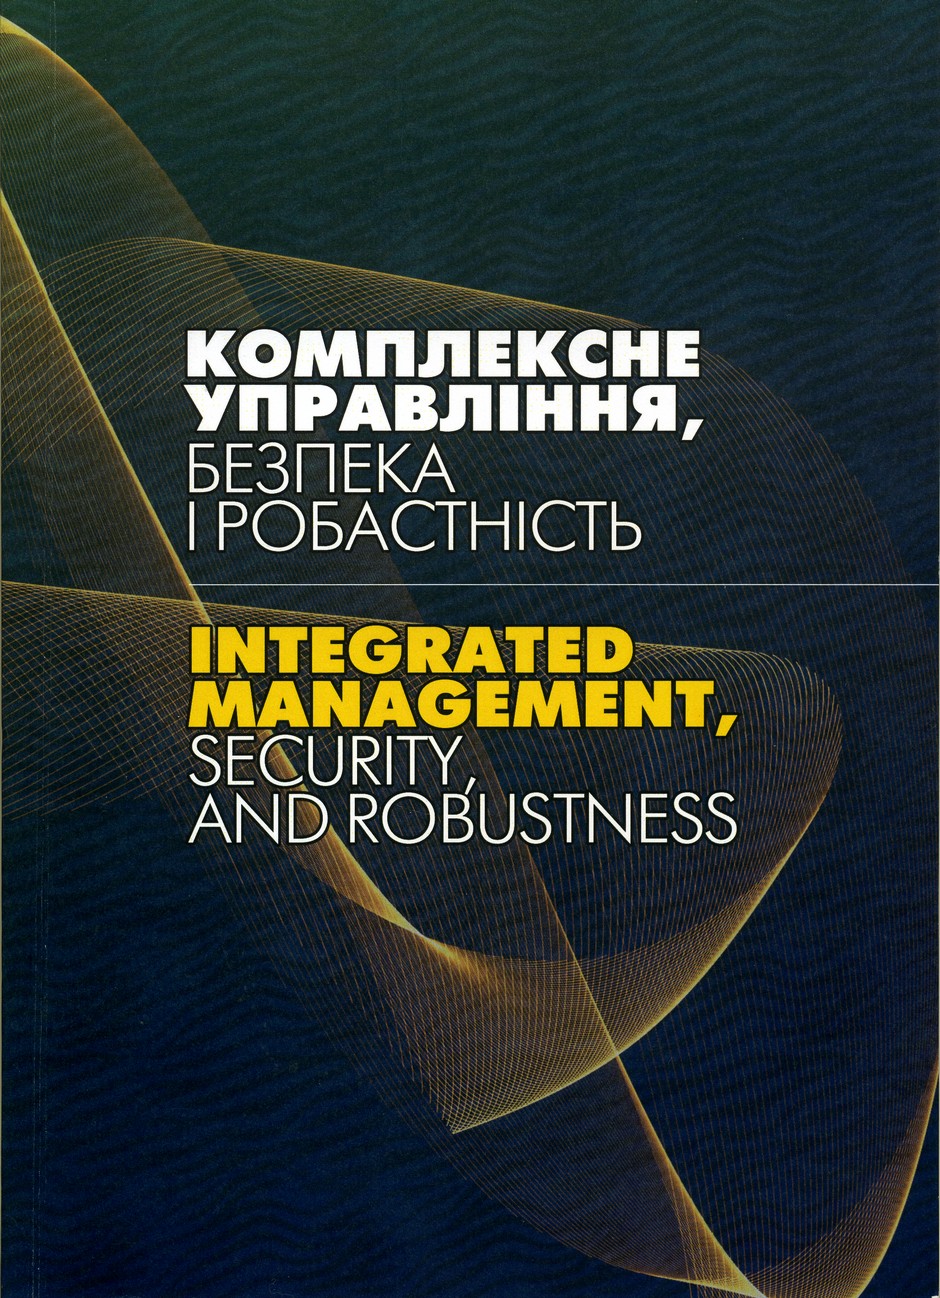 integrated management security and robustness